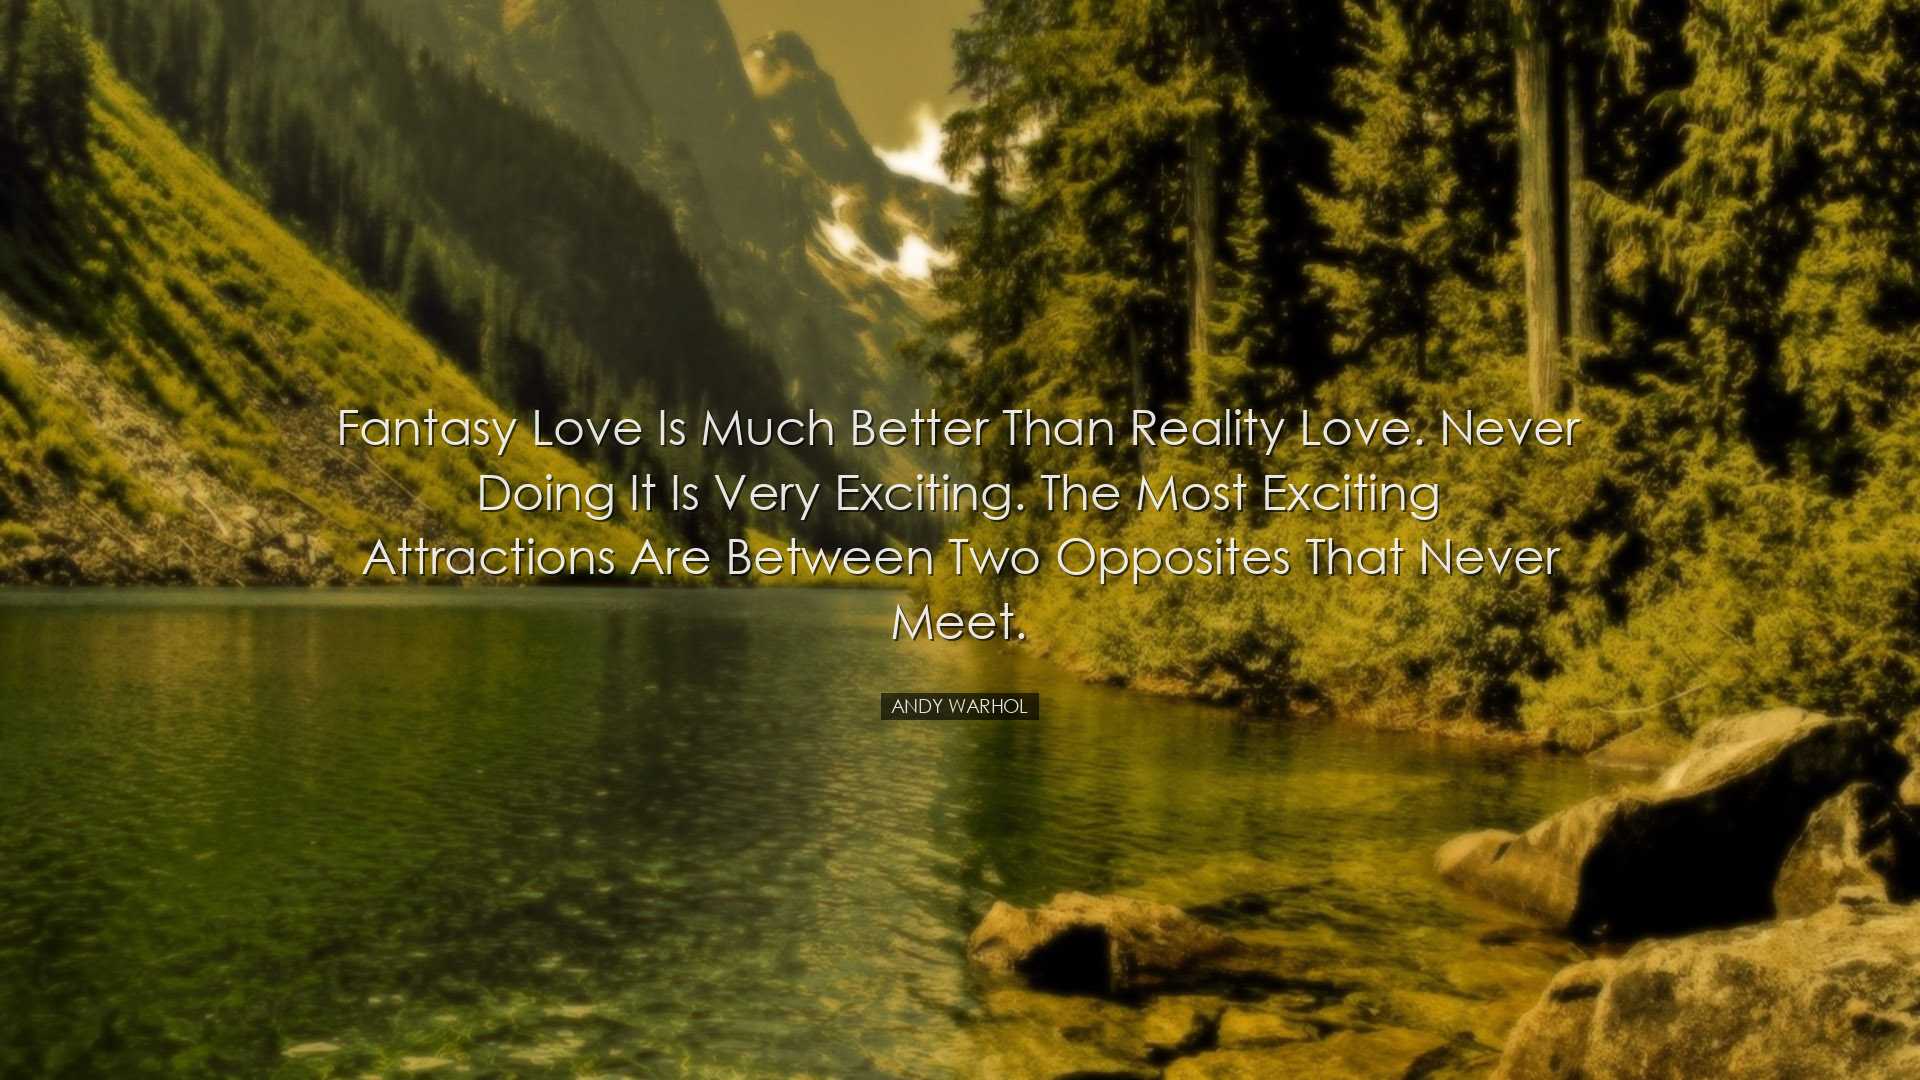 Fantasy love is much better than reality love. Never doing it is v